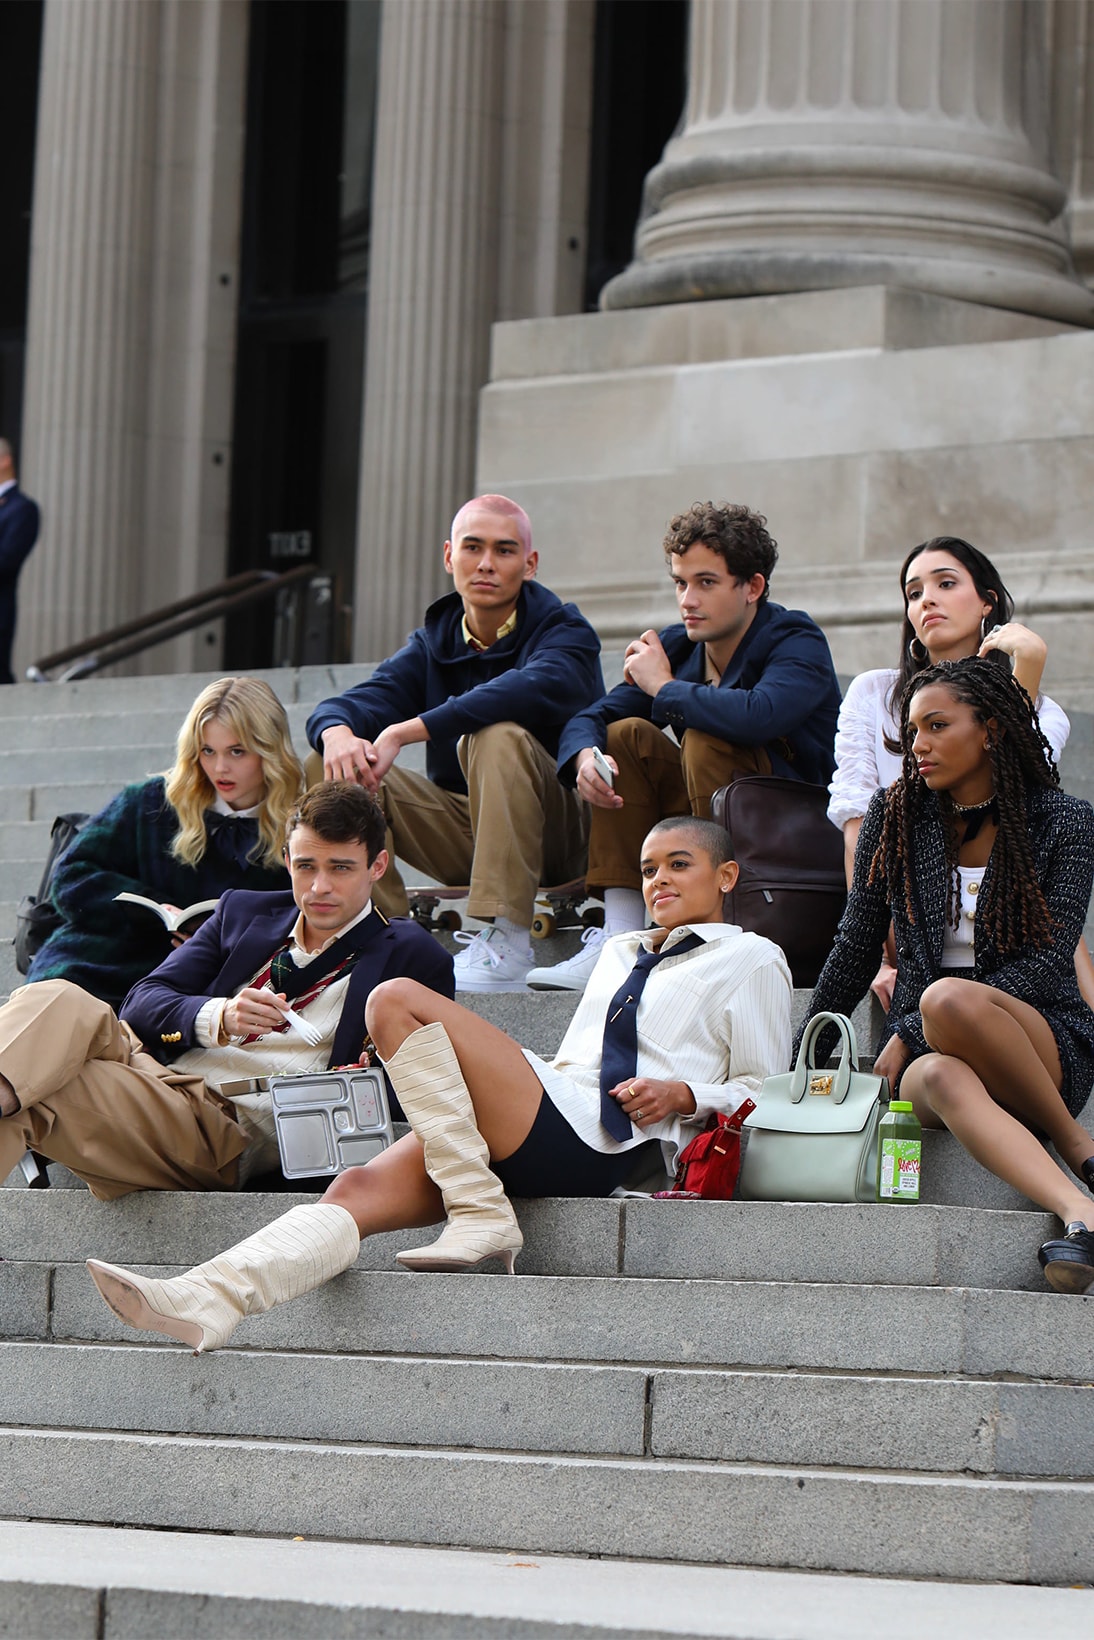 gossip girl reboot hbo max first look whitney peak eli brown on set production tv shows television new york city 